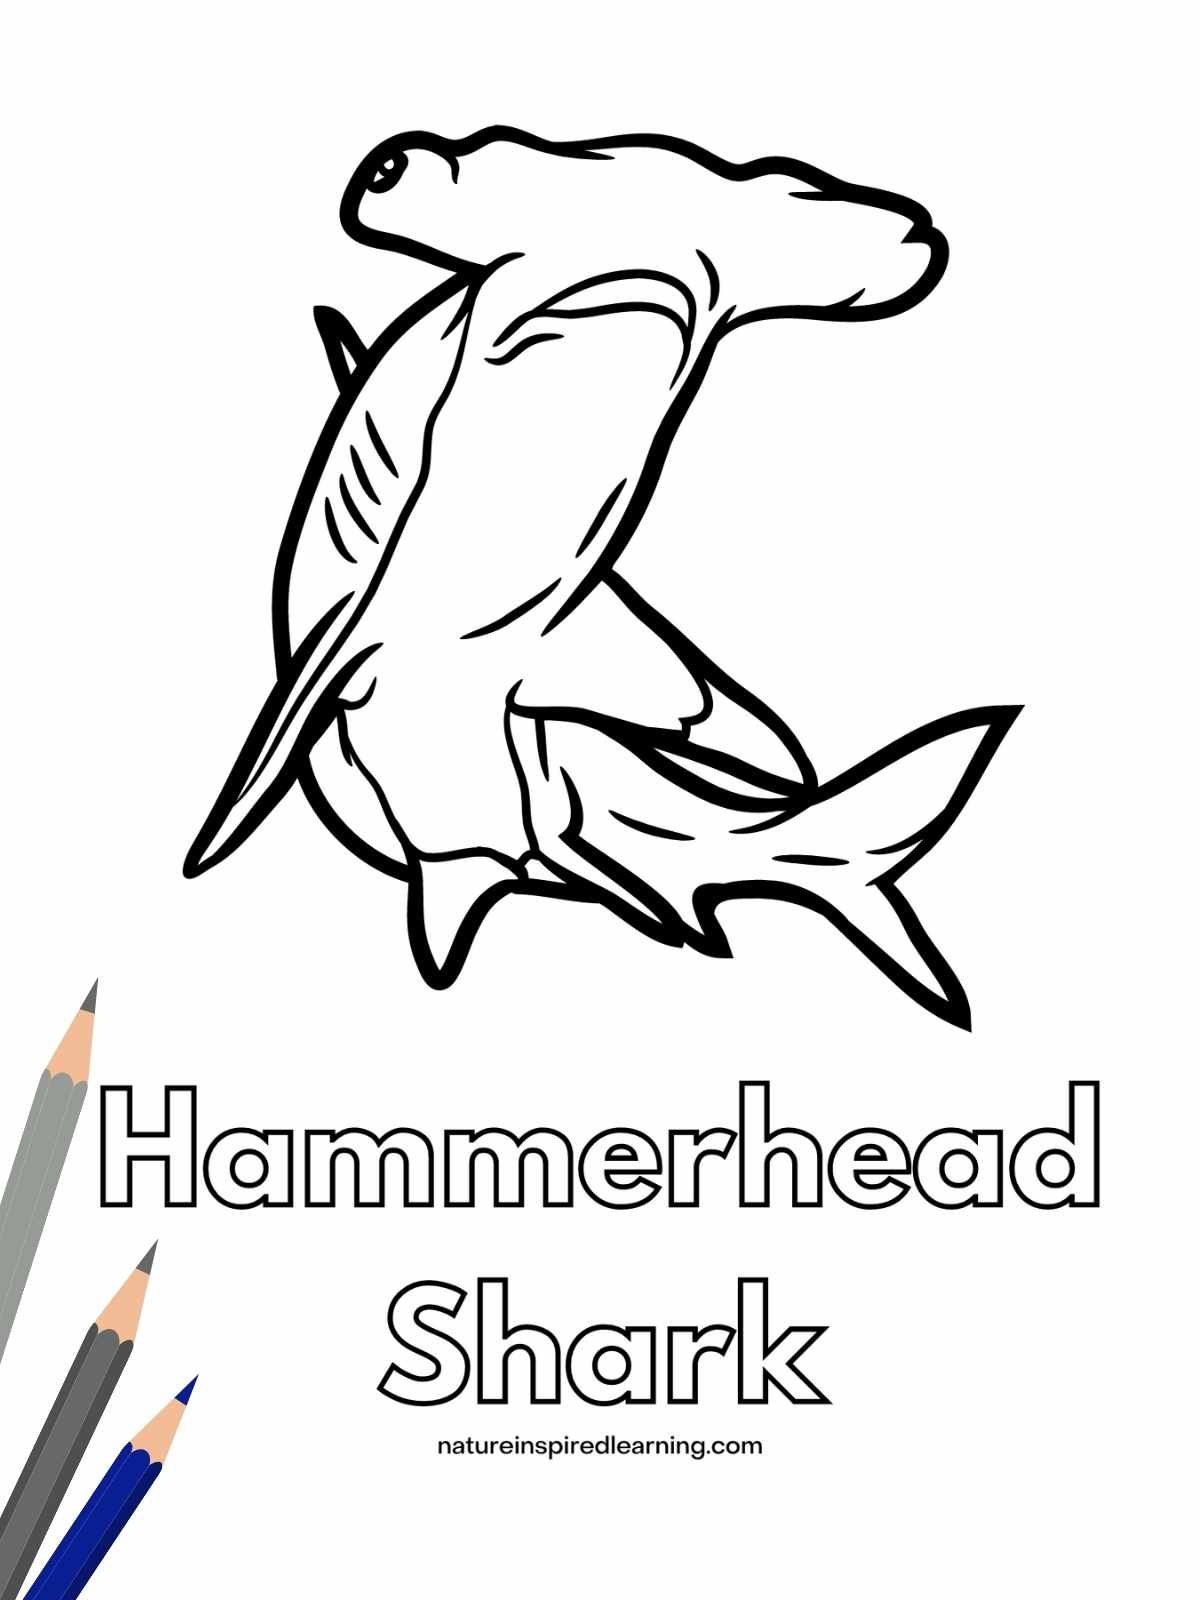 large hammerhead shark swimming up with Hammerhead Shark written below in bubble letters. Three colored pencils on top of printable bottom left